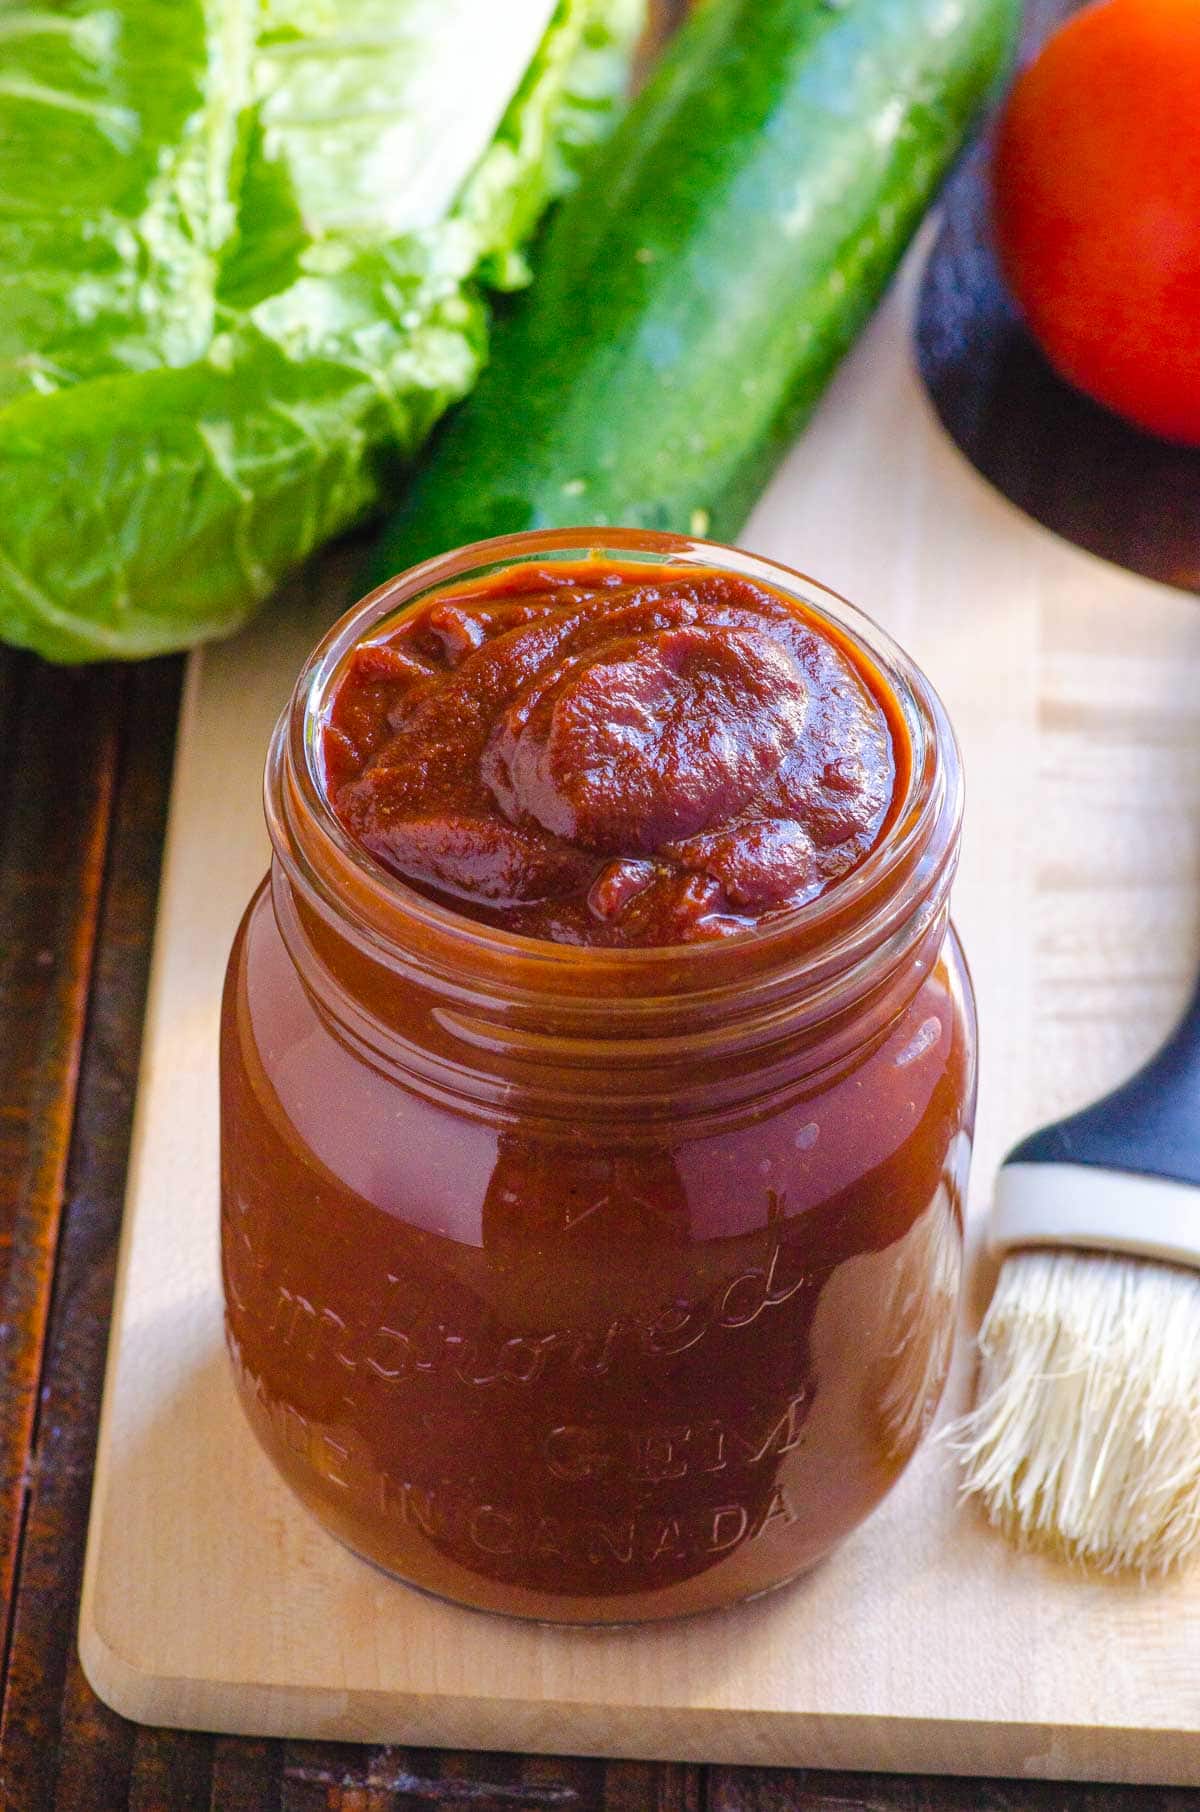 Healthy bbq sauce recipe with basting brunch on cutting board.